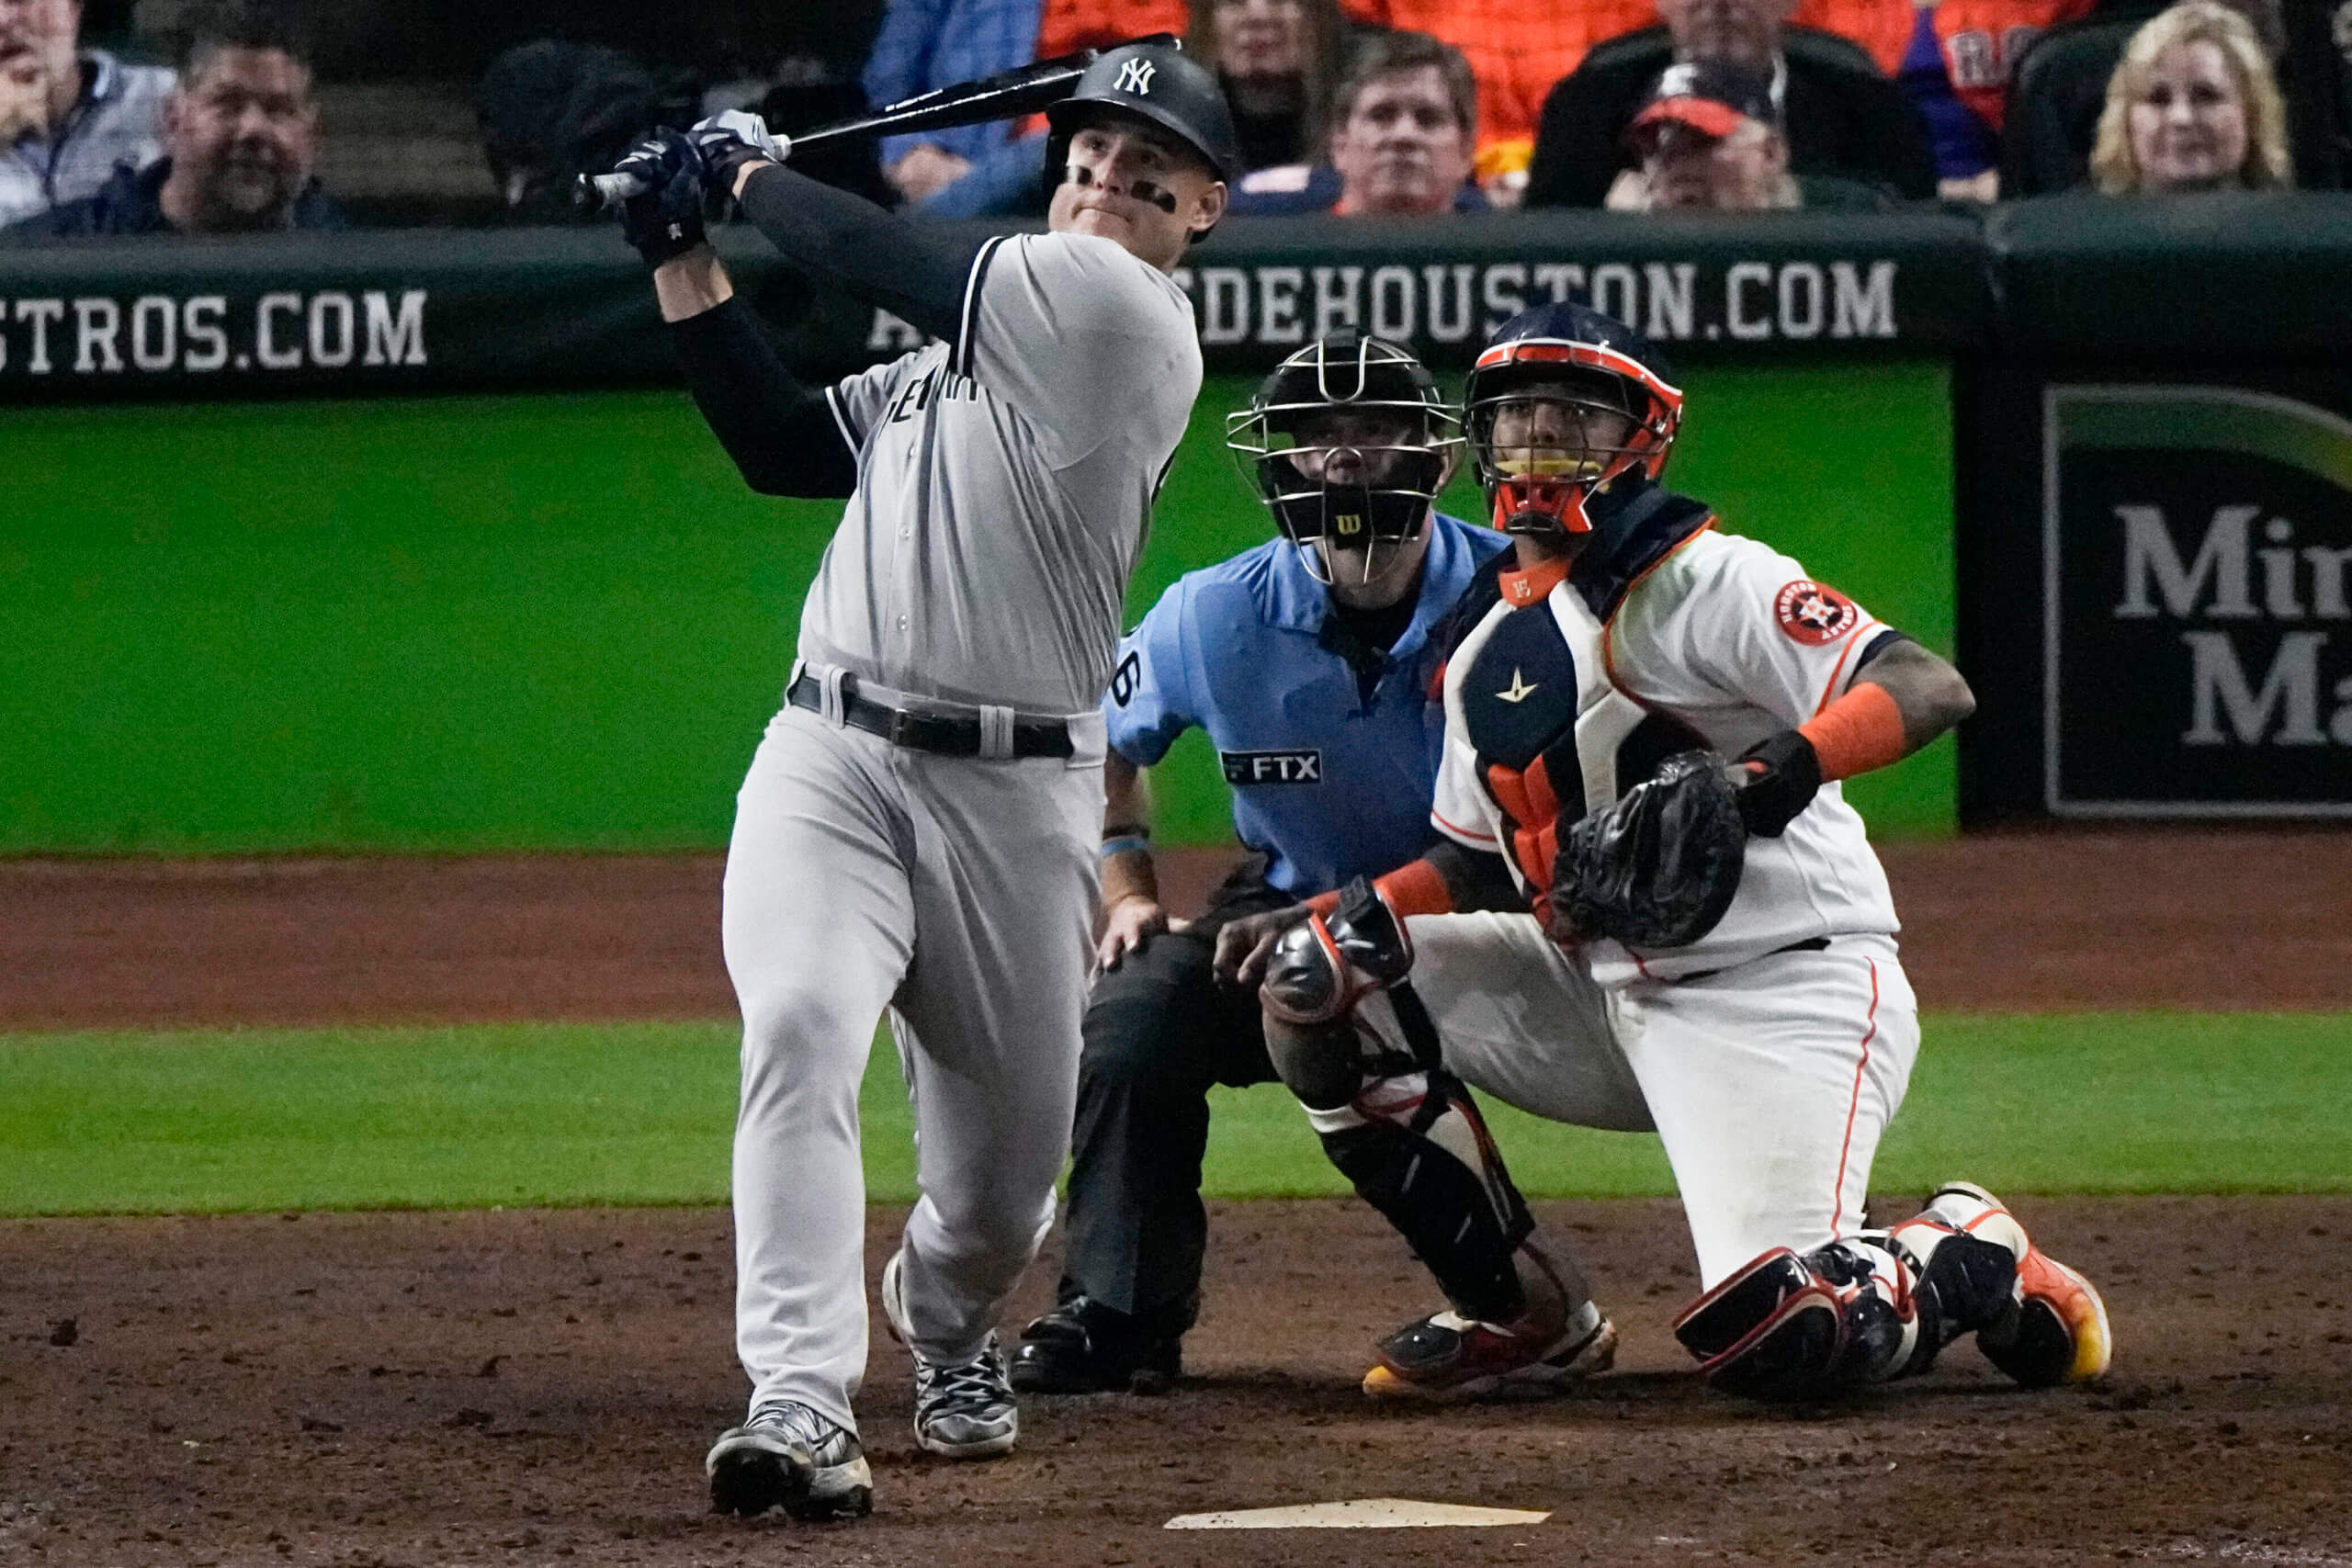 Yankees MLB playoffs hitting struggles continue vs Astros in ALCS